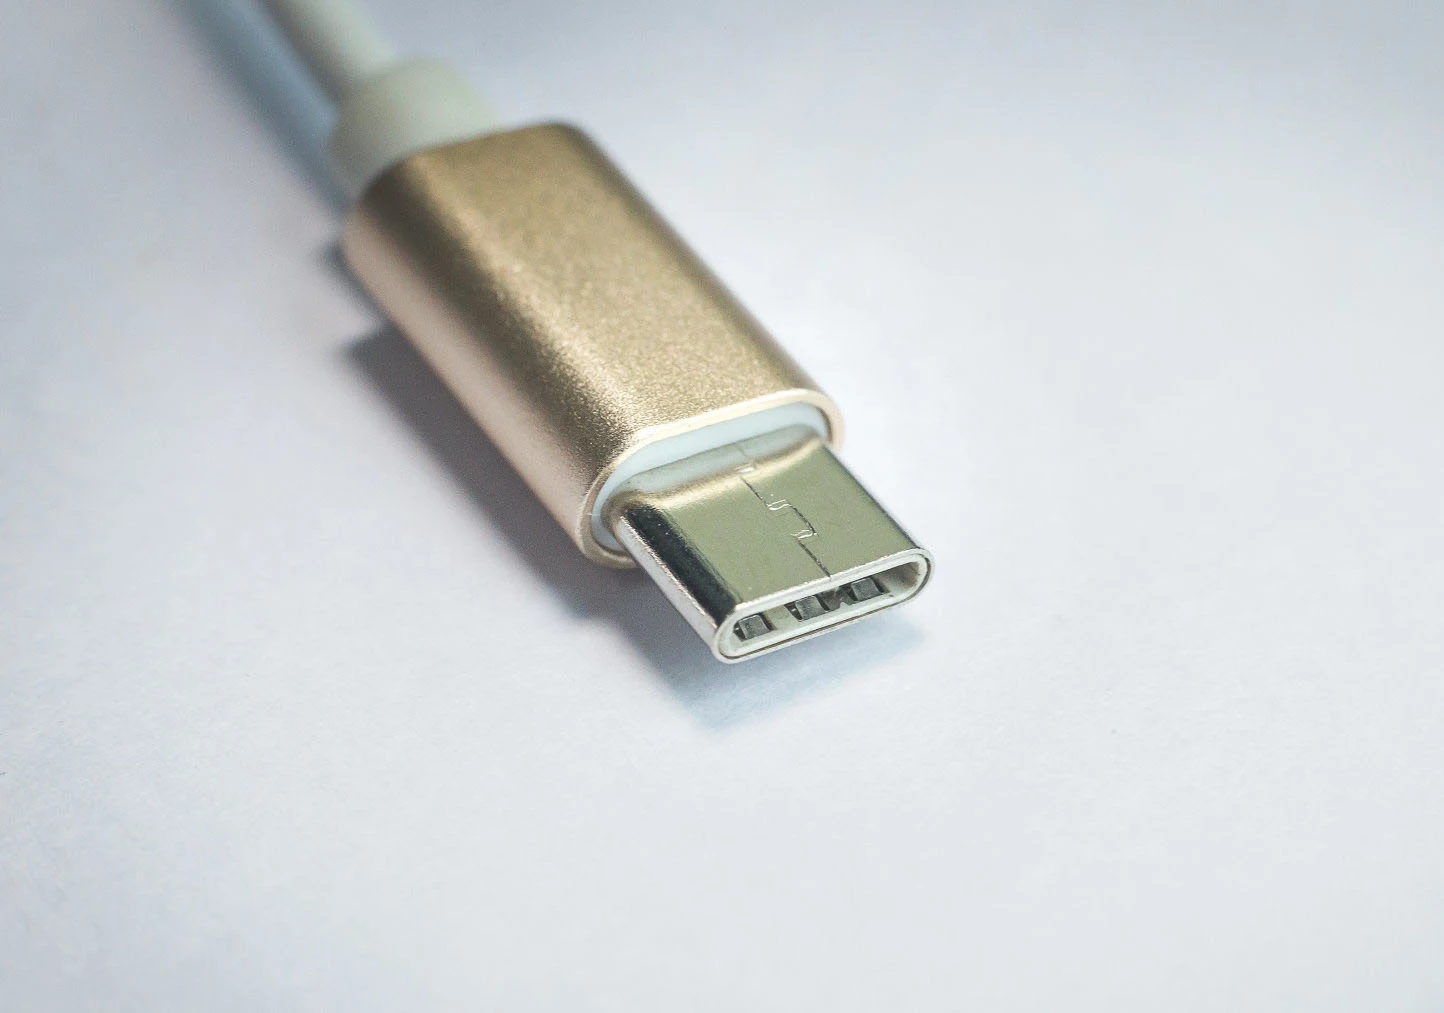 USB-C could soon offer protection against nefarious devices